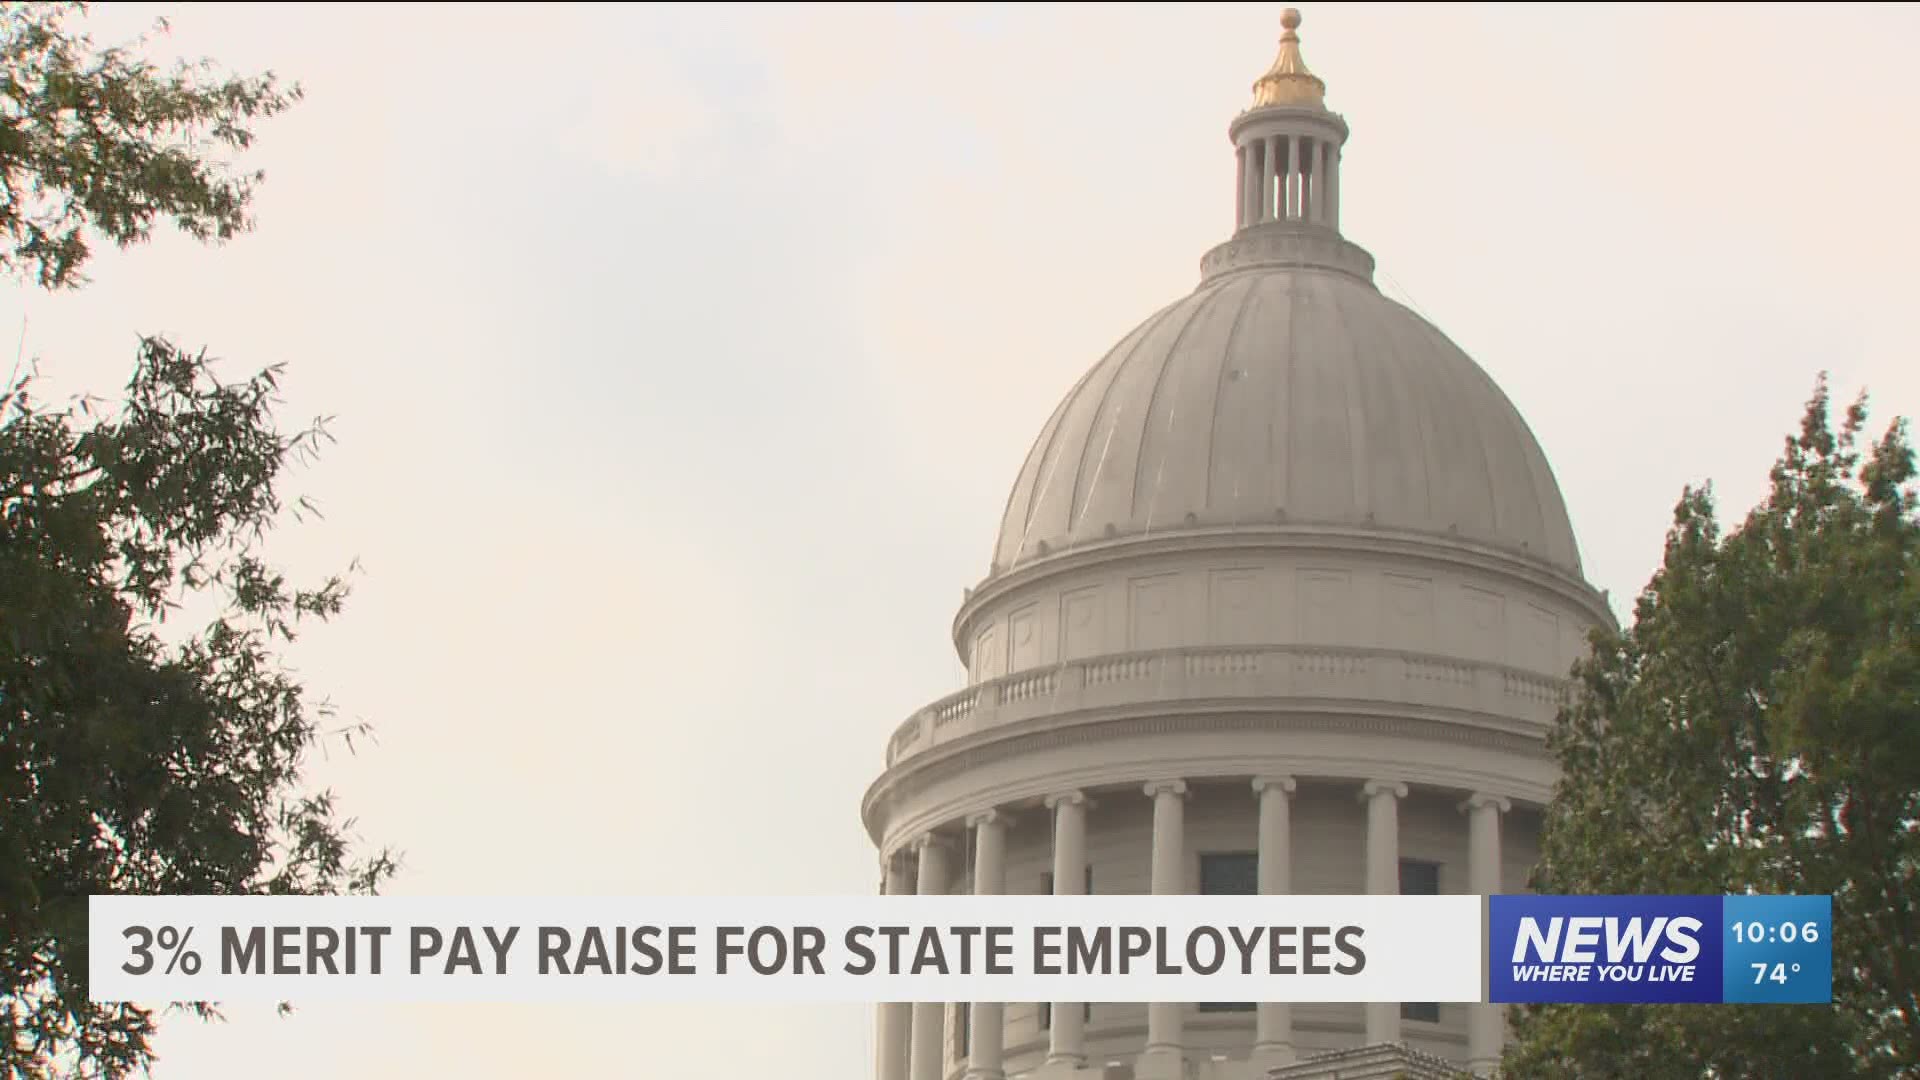 Nearly 26,000 state employees will be eligible for the raises.